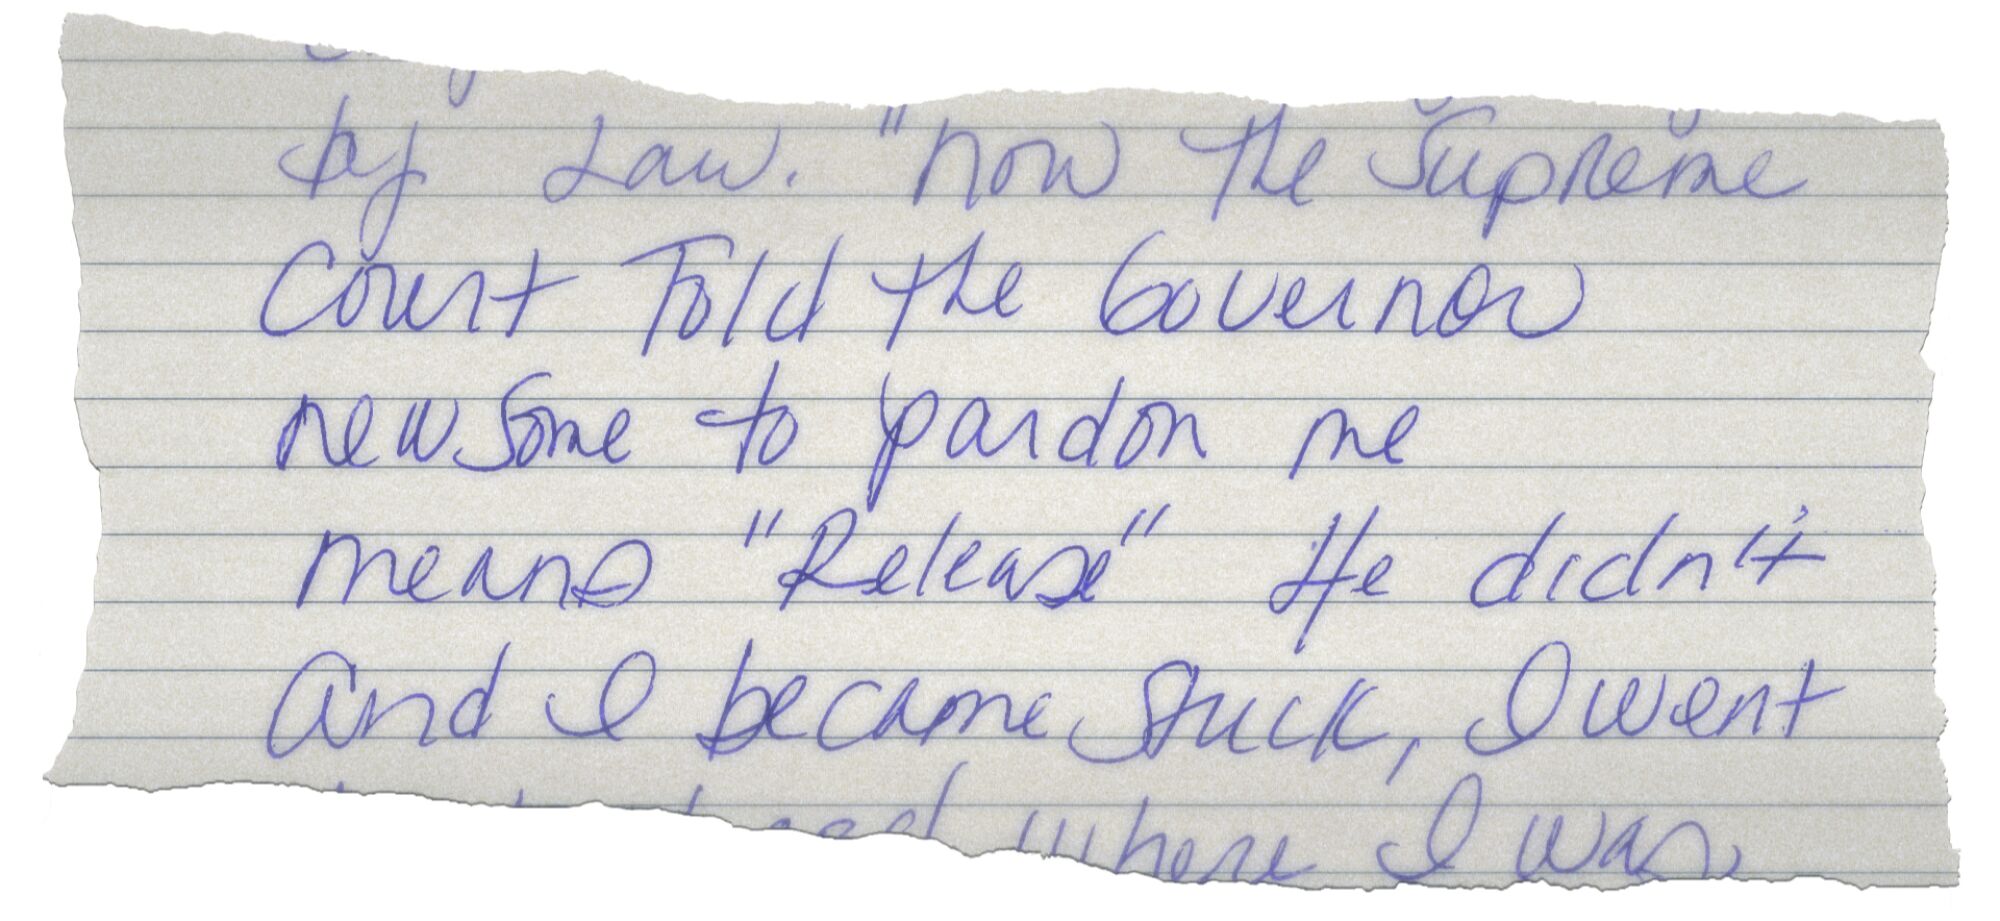 A torn section of a handwritten letter on lined paper